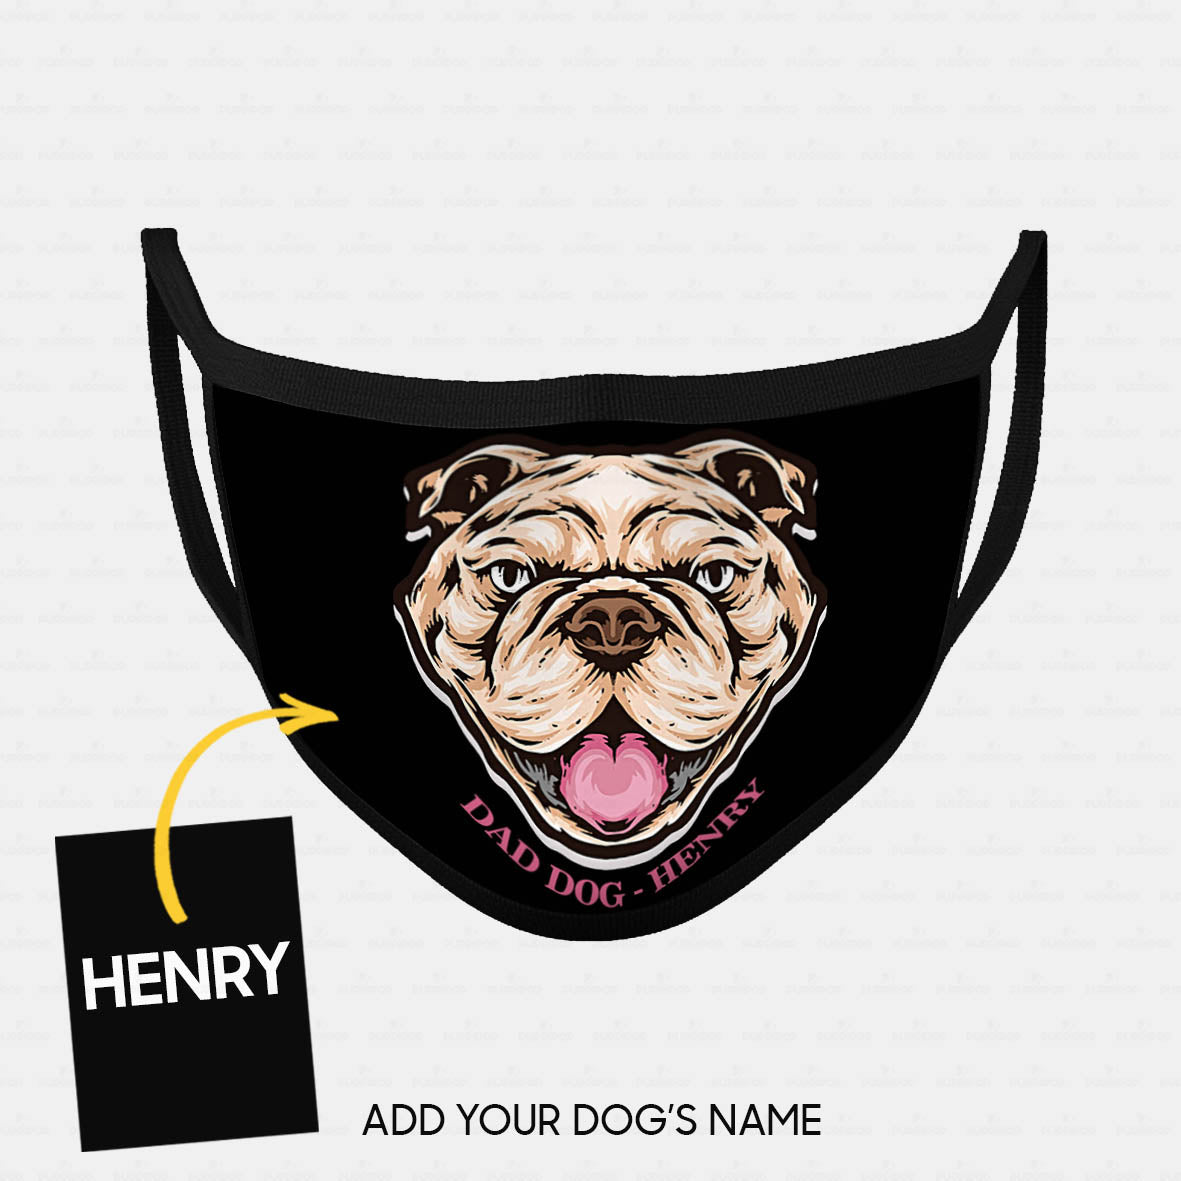 Personalized Dog Gift Idea - Bad Dog With Pinky Tongue For Dog Lovers - Cloth Mask